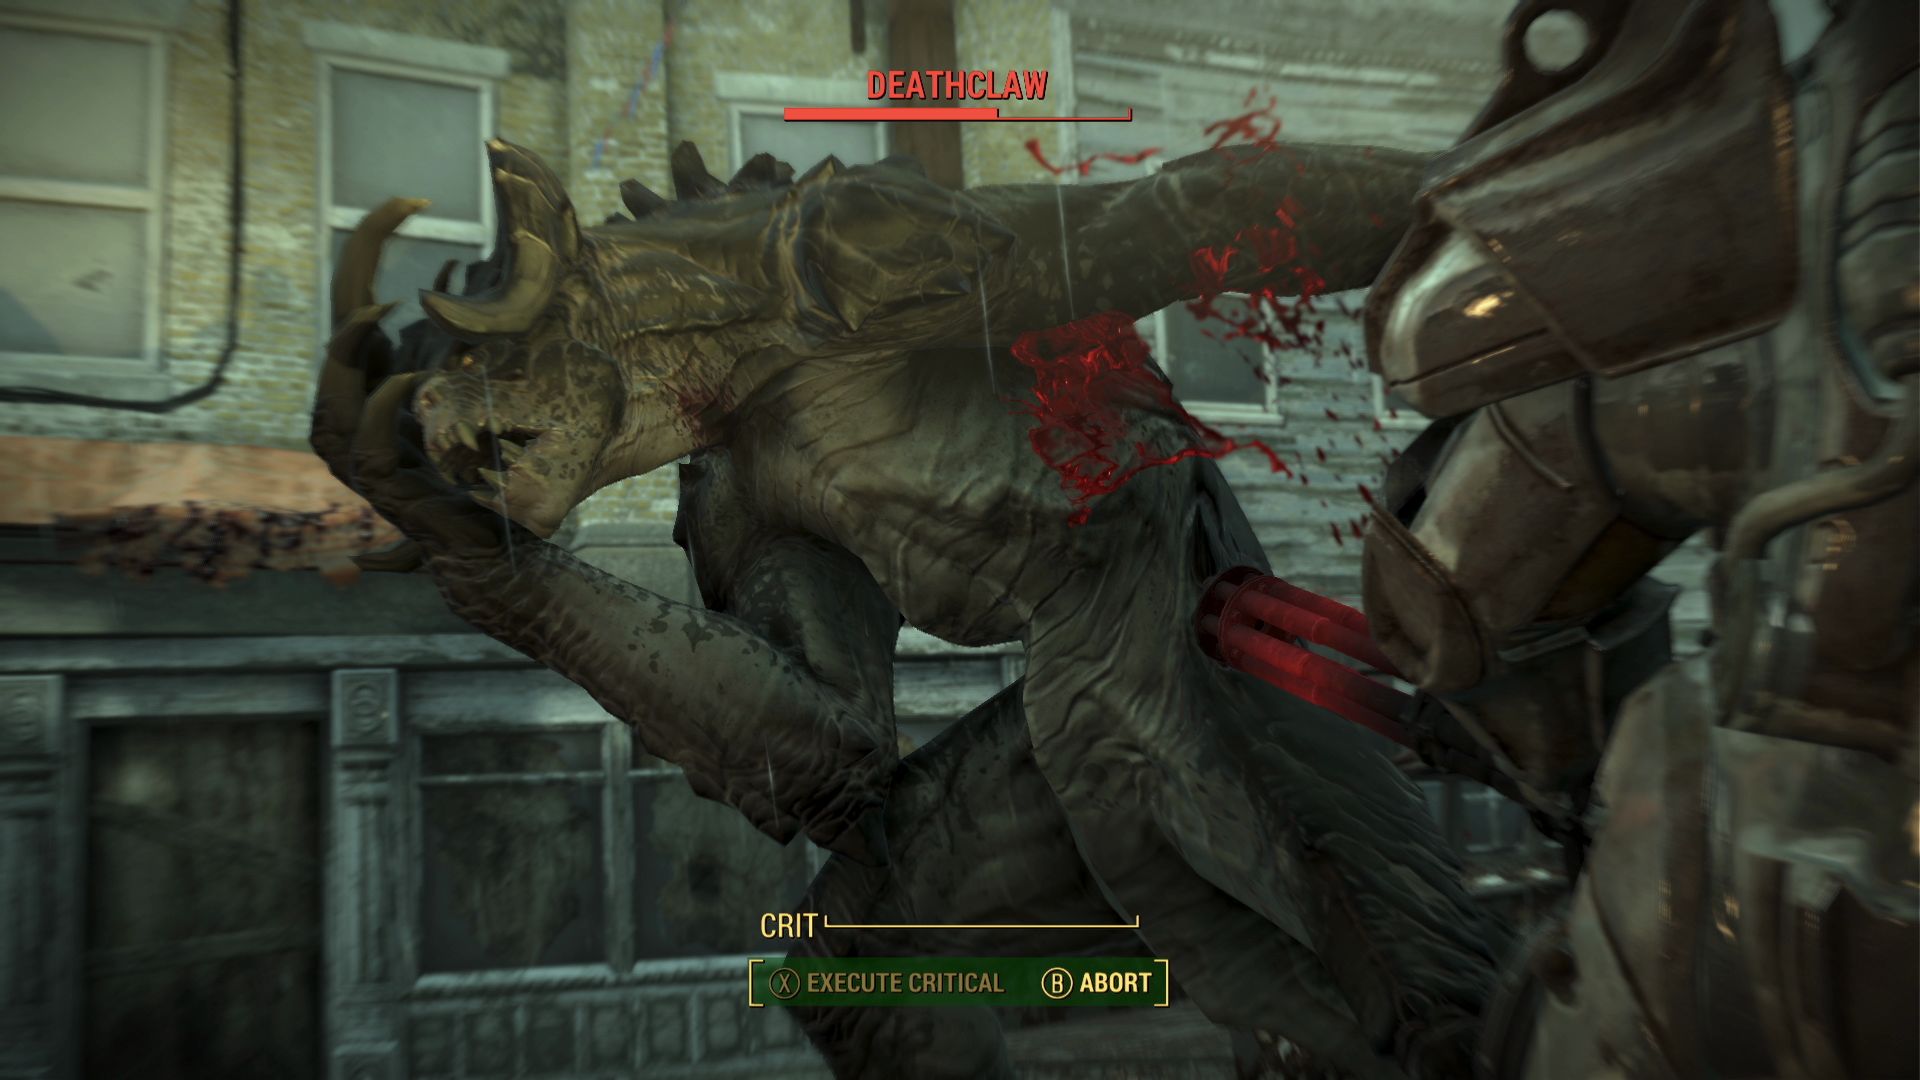 High Quality Fallout 4 Deathclaw Blank Meme Template